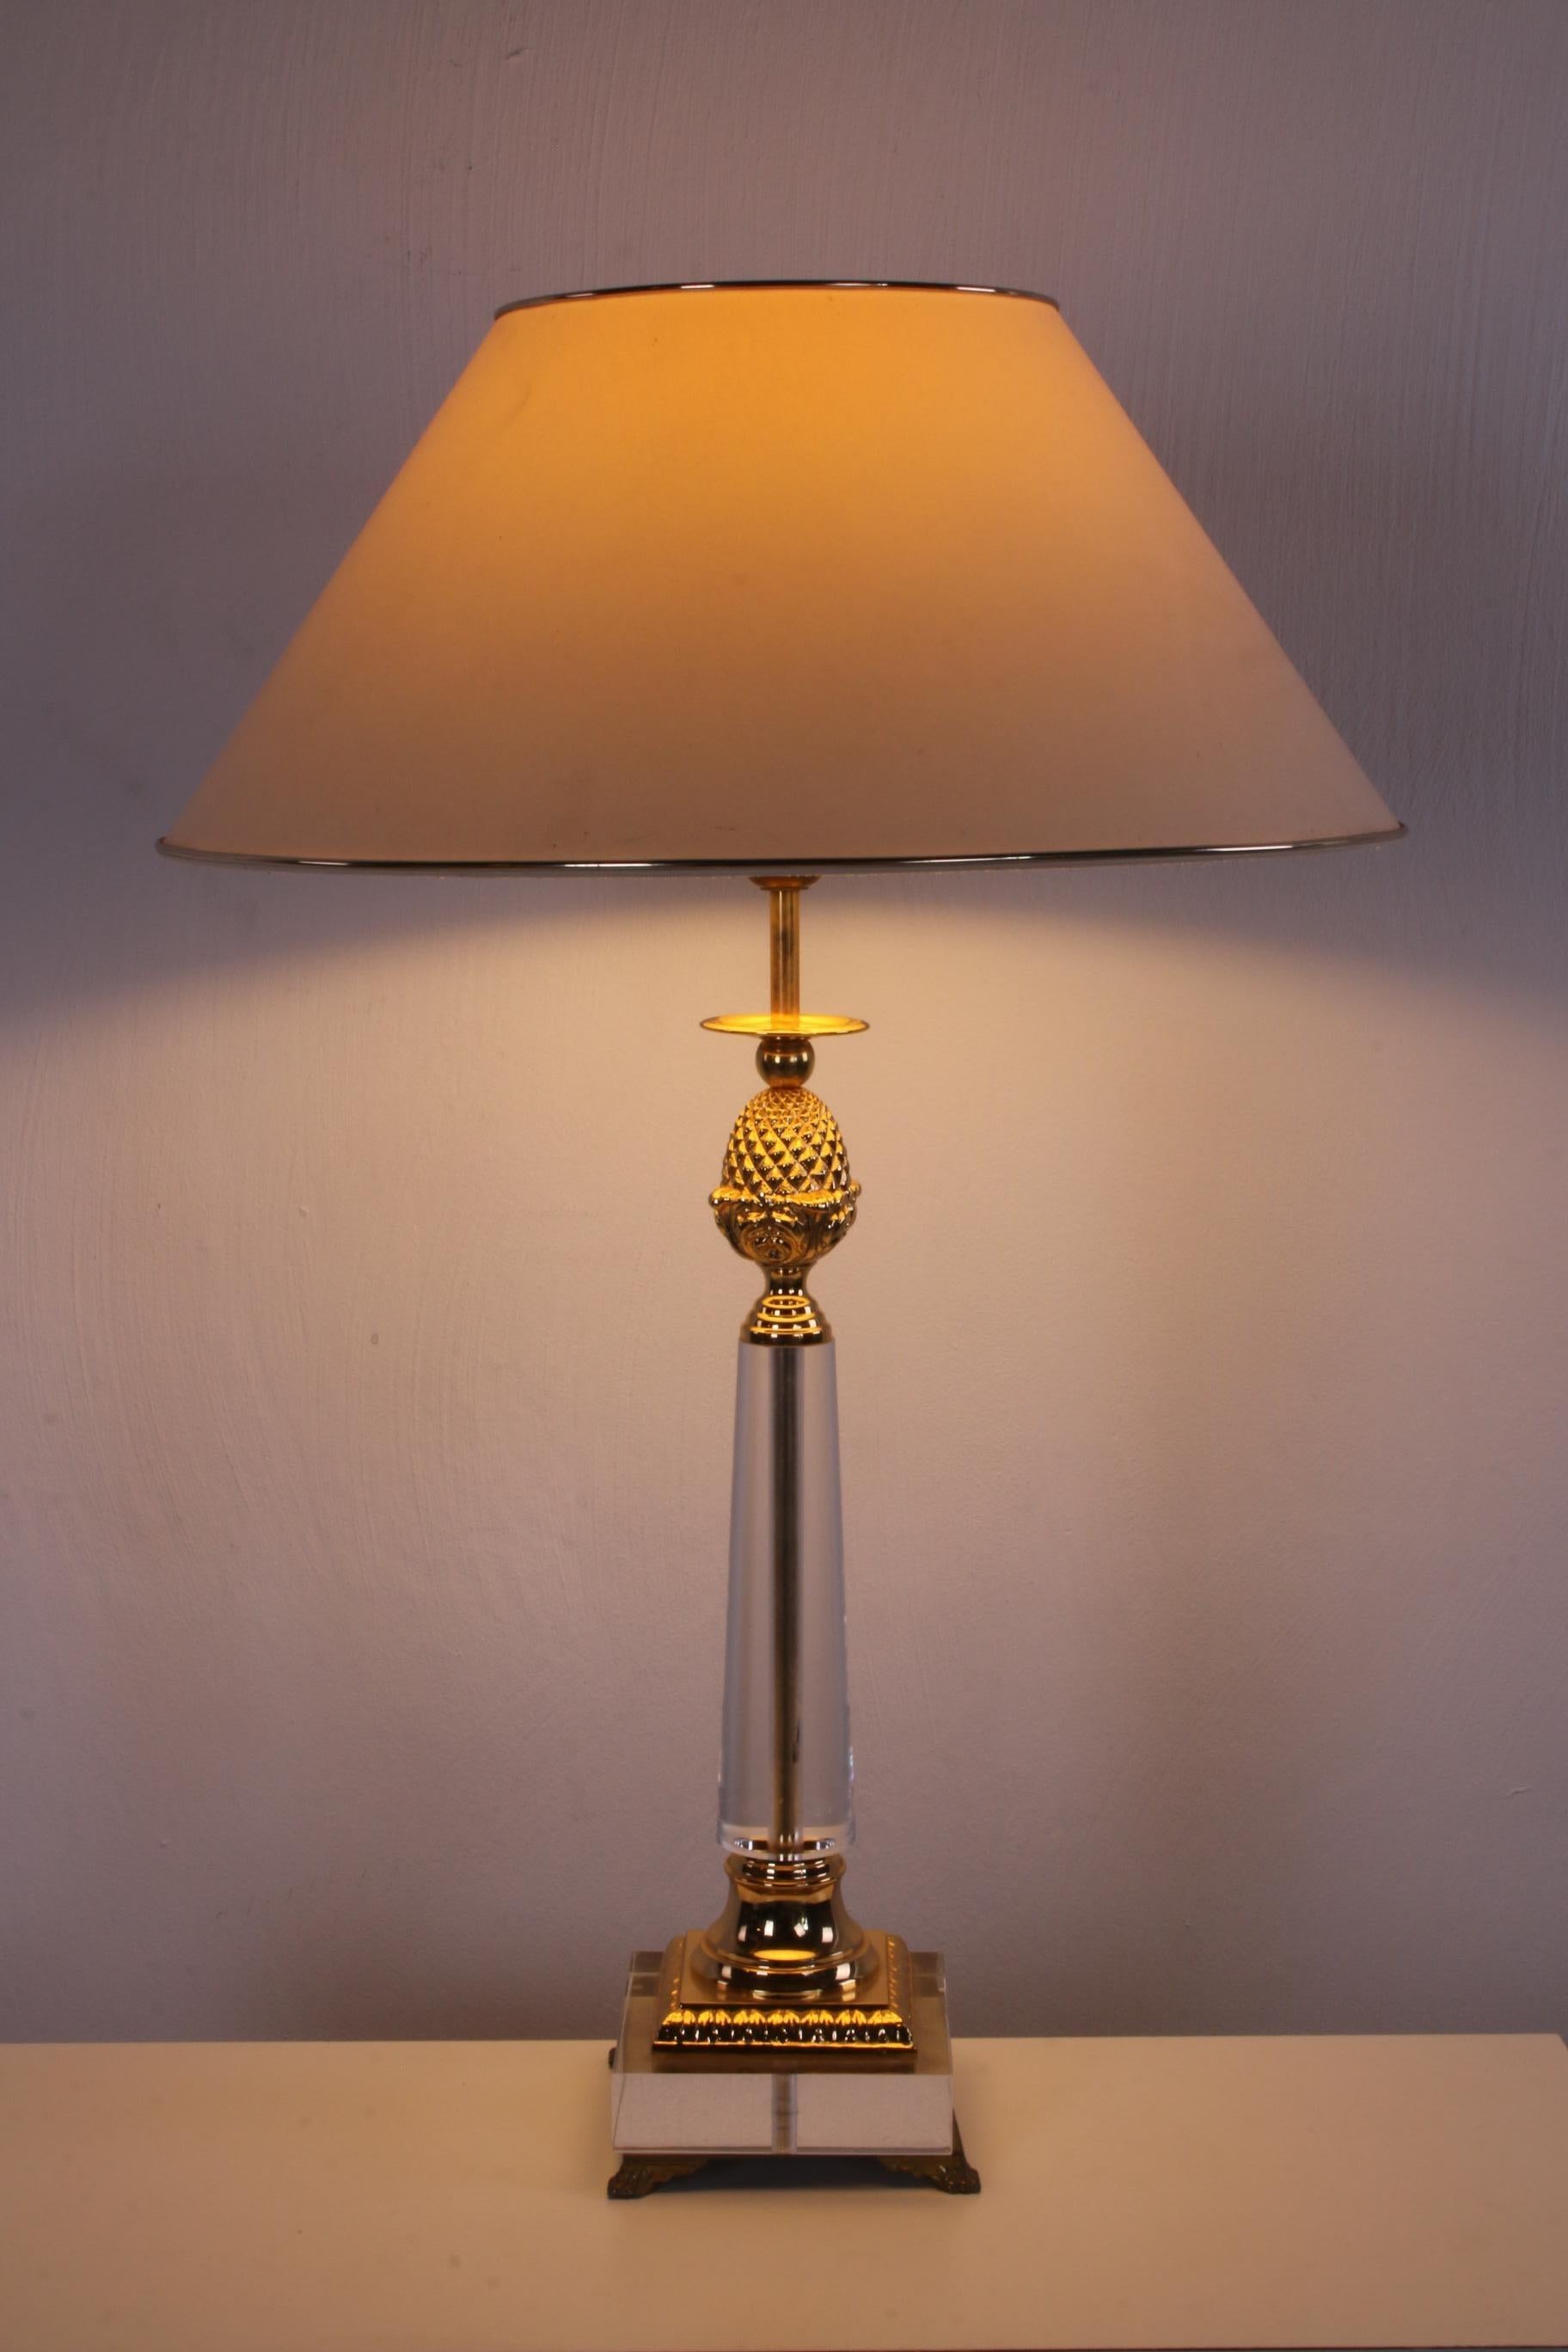 Plexiglass table lamp with golden elements Hollywood Regency style


This is a table lamp with the Hollywood Regency style, there is also a pineapple in between and the base is made of plexiglass. A beautiful specimen with hood, the cabling is